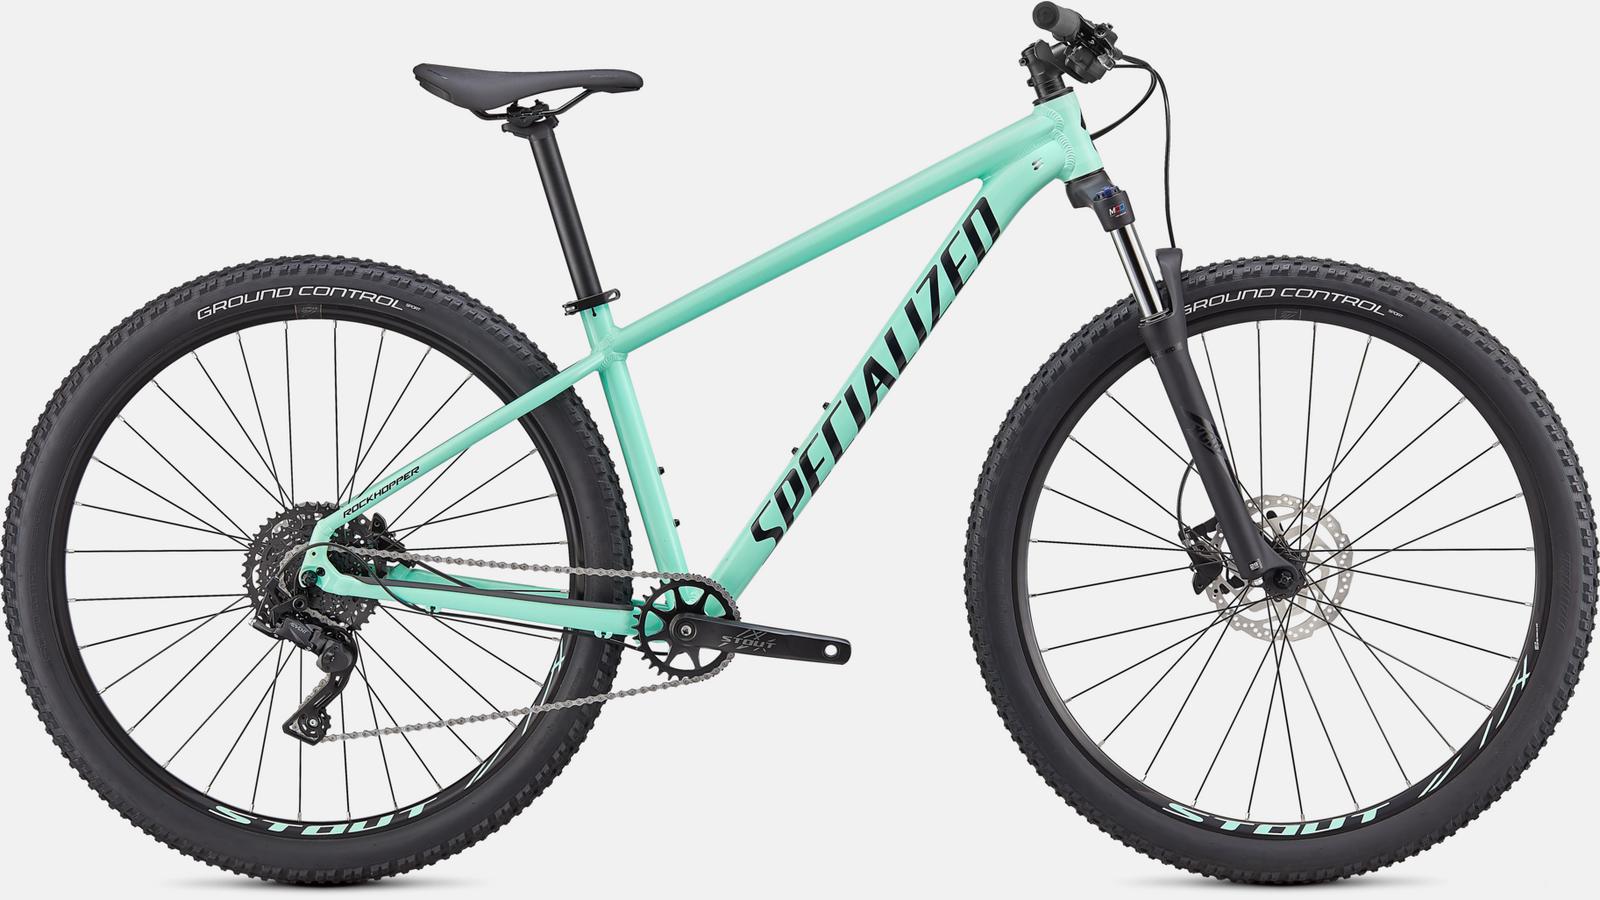 Paint for 2021 Specialized Rockhopper Comp 27.5 - Gloss Oasis